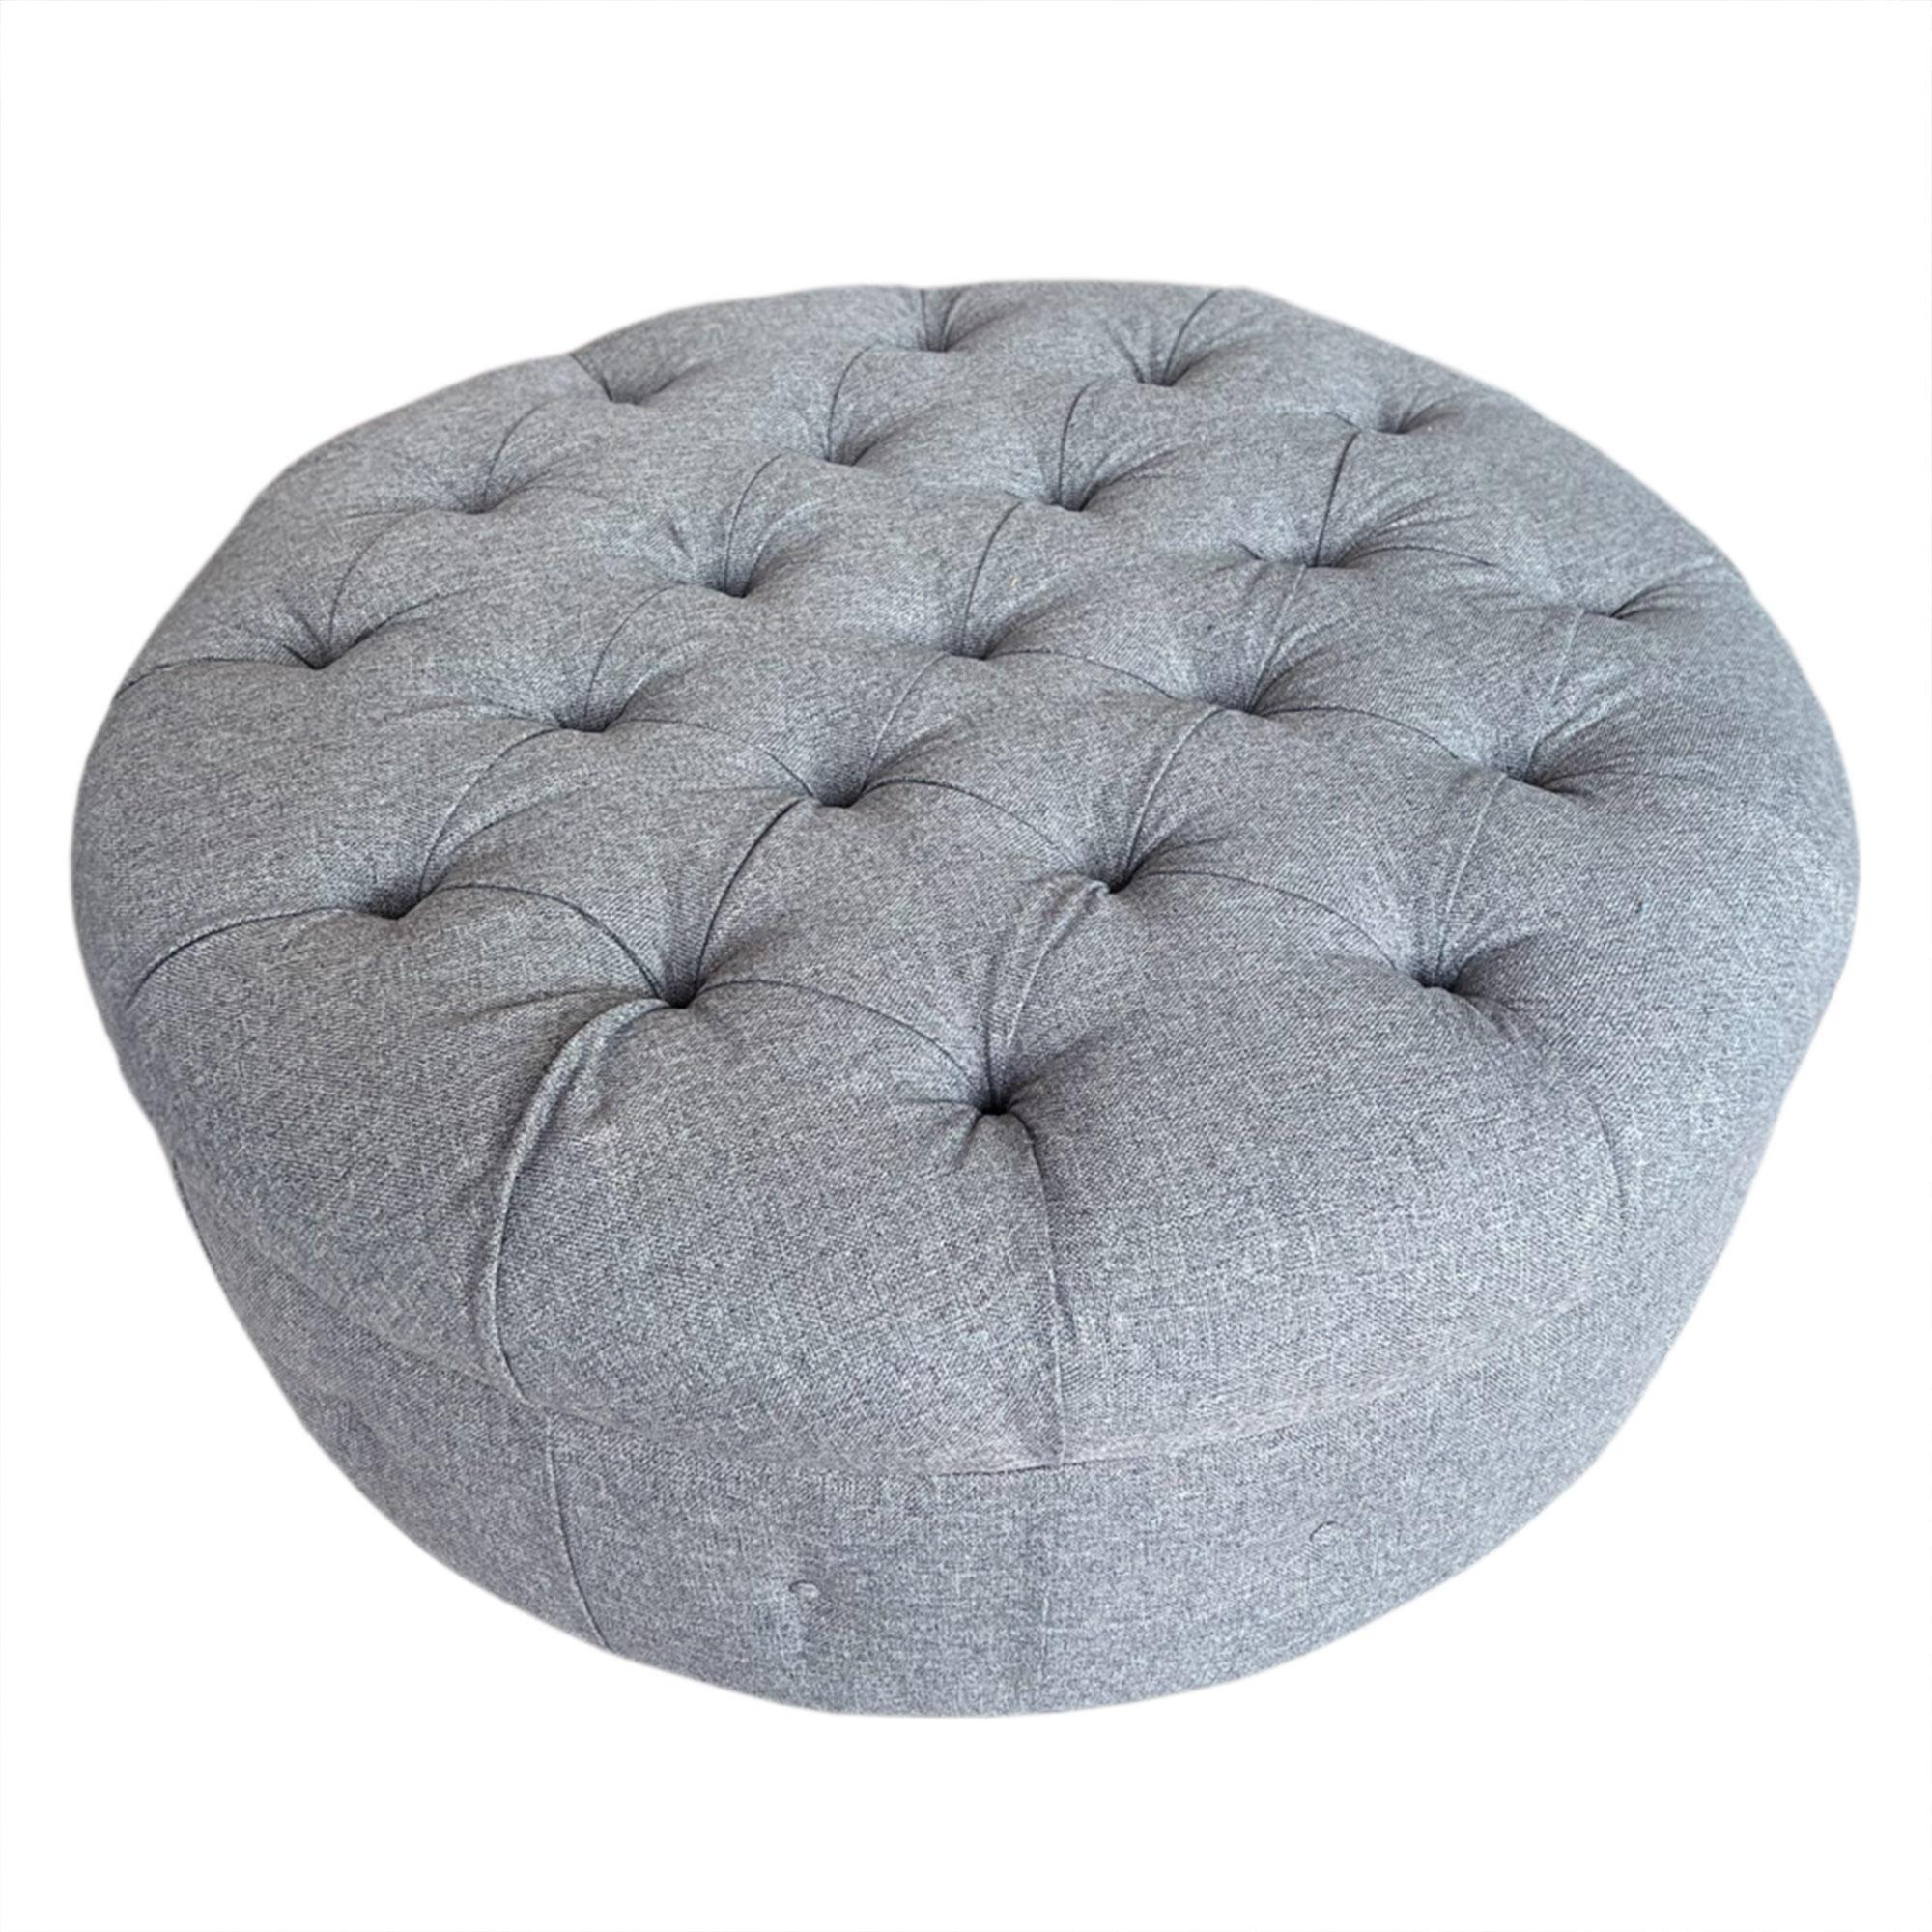 The original owner of this large buttoned pouffe had it specially made to their own design. We've had it reupholstered in luxurious wool fabric and it sits on ebonised, round tapering feet. 

Made in Britain in the late 20th century. 

A great